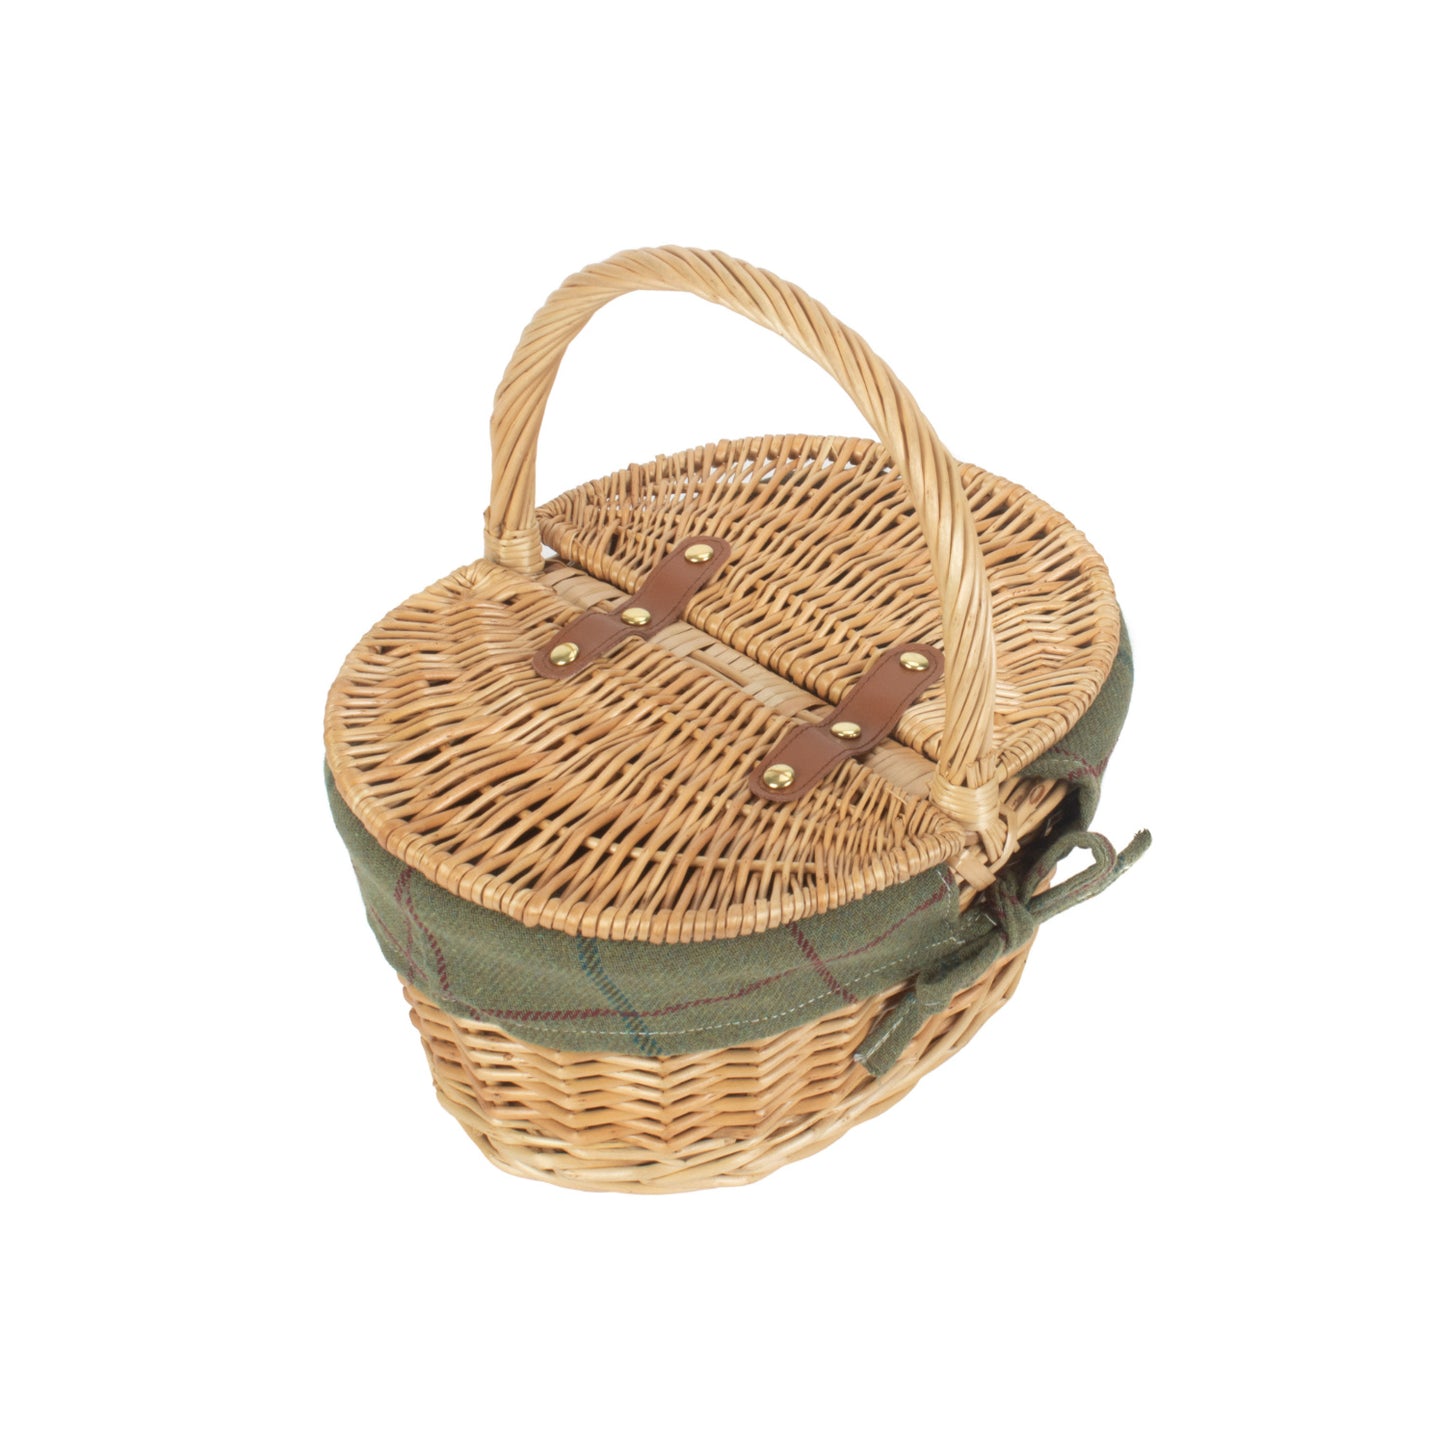 Child's Oval Lined Lidded Hamper With Green Tweed Lining